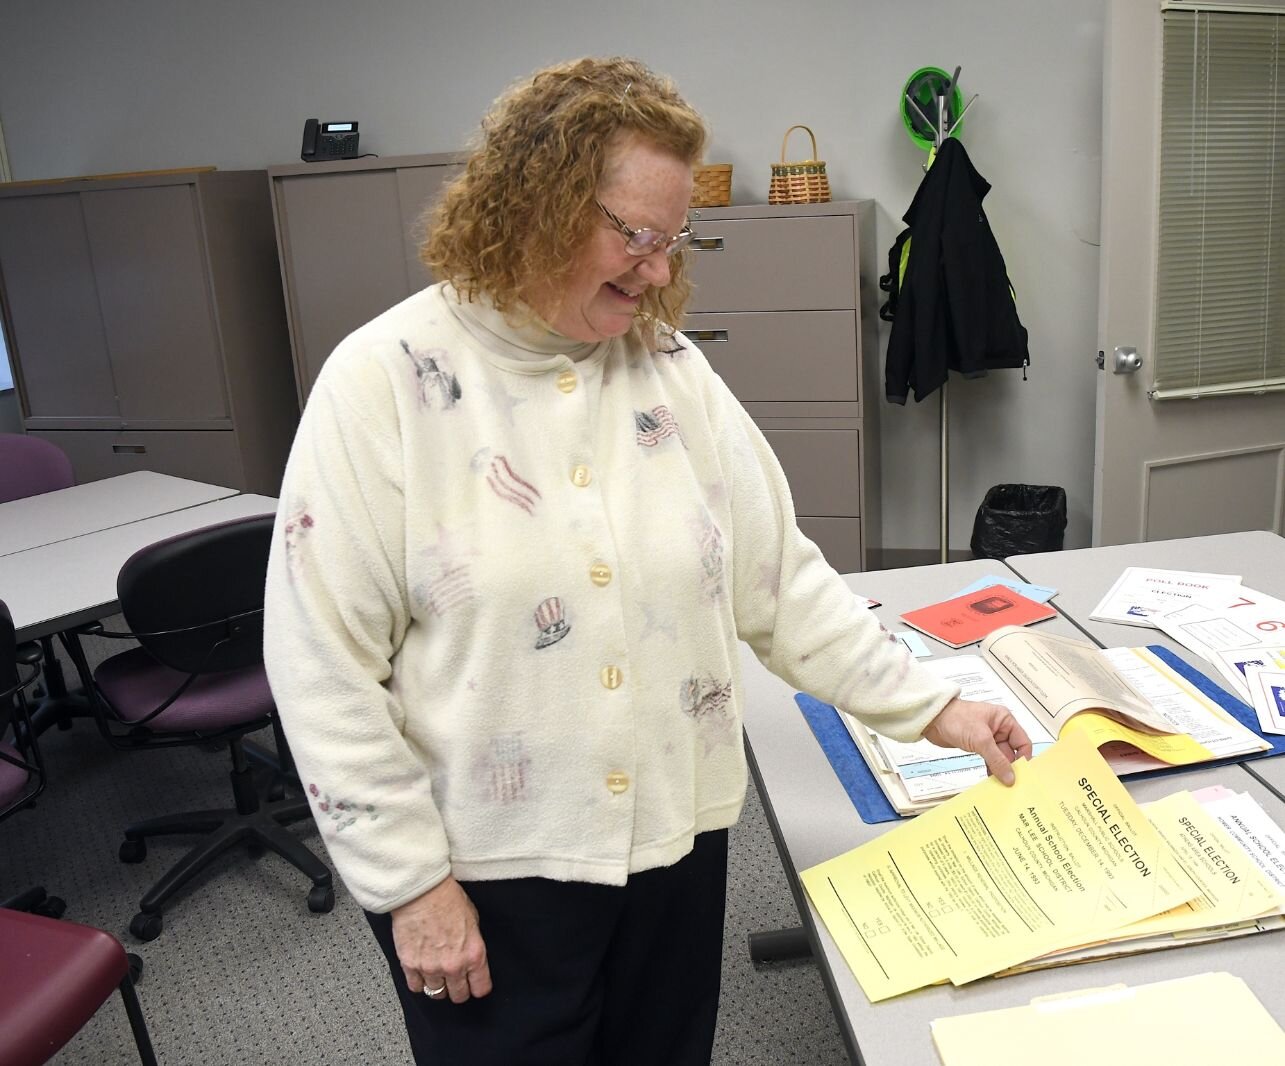 Teri Loew, Chief Deputy Clerk of Elections for Calhoun County, reviews old election materials.